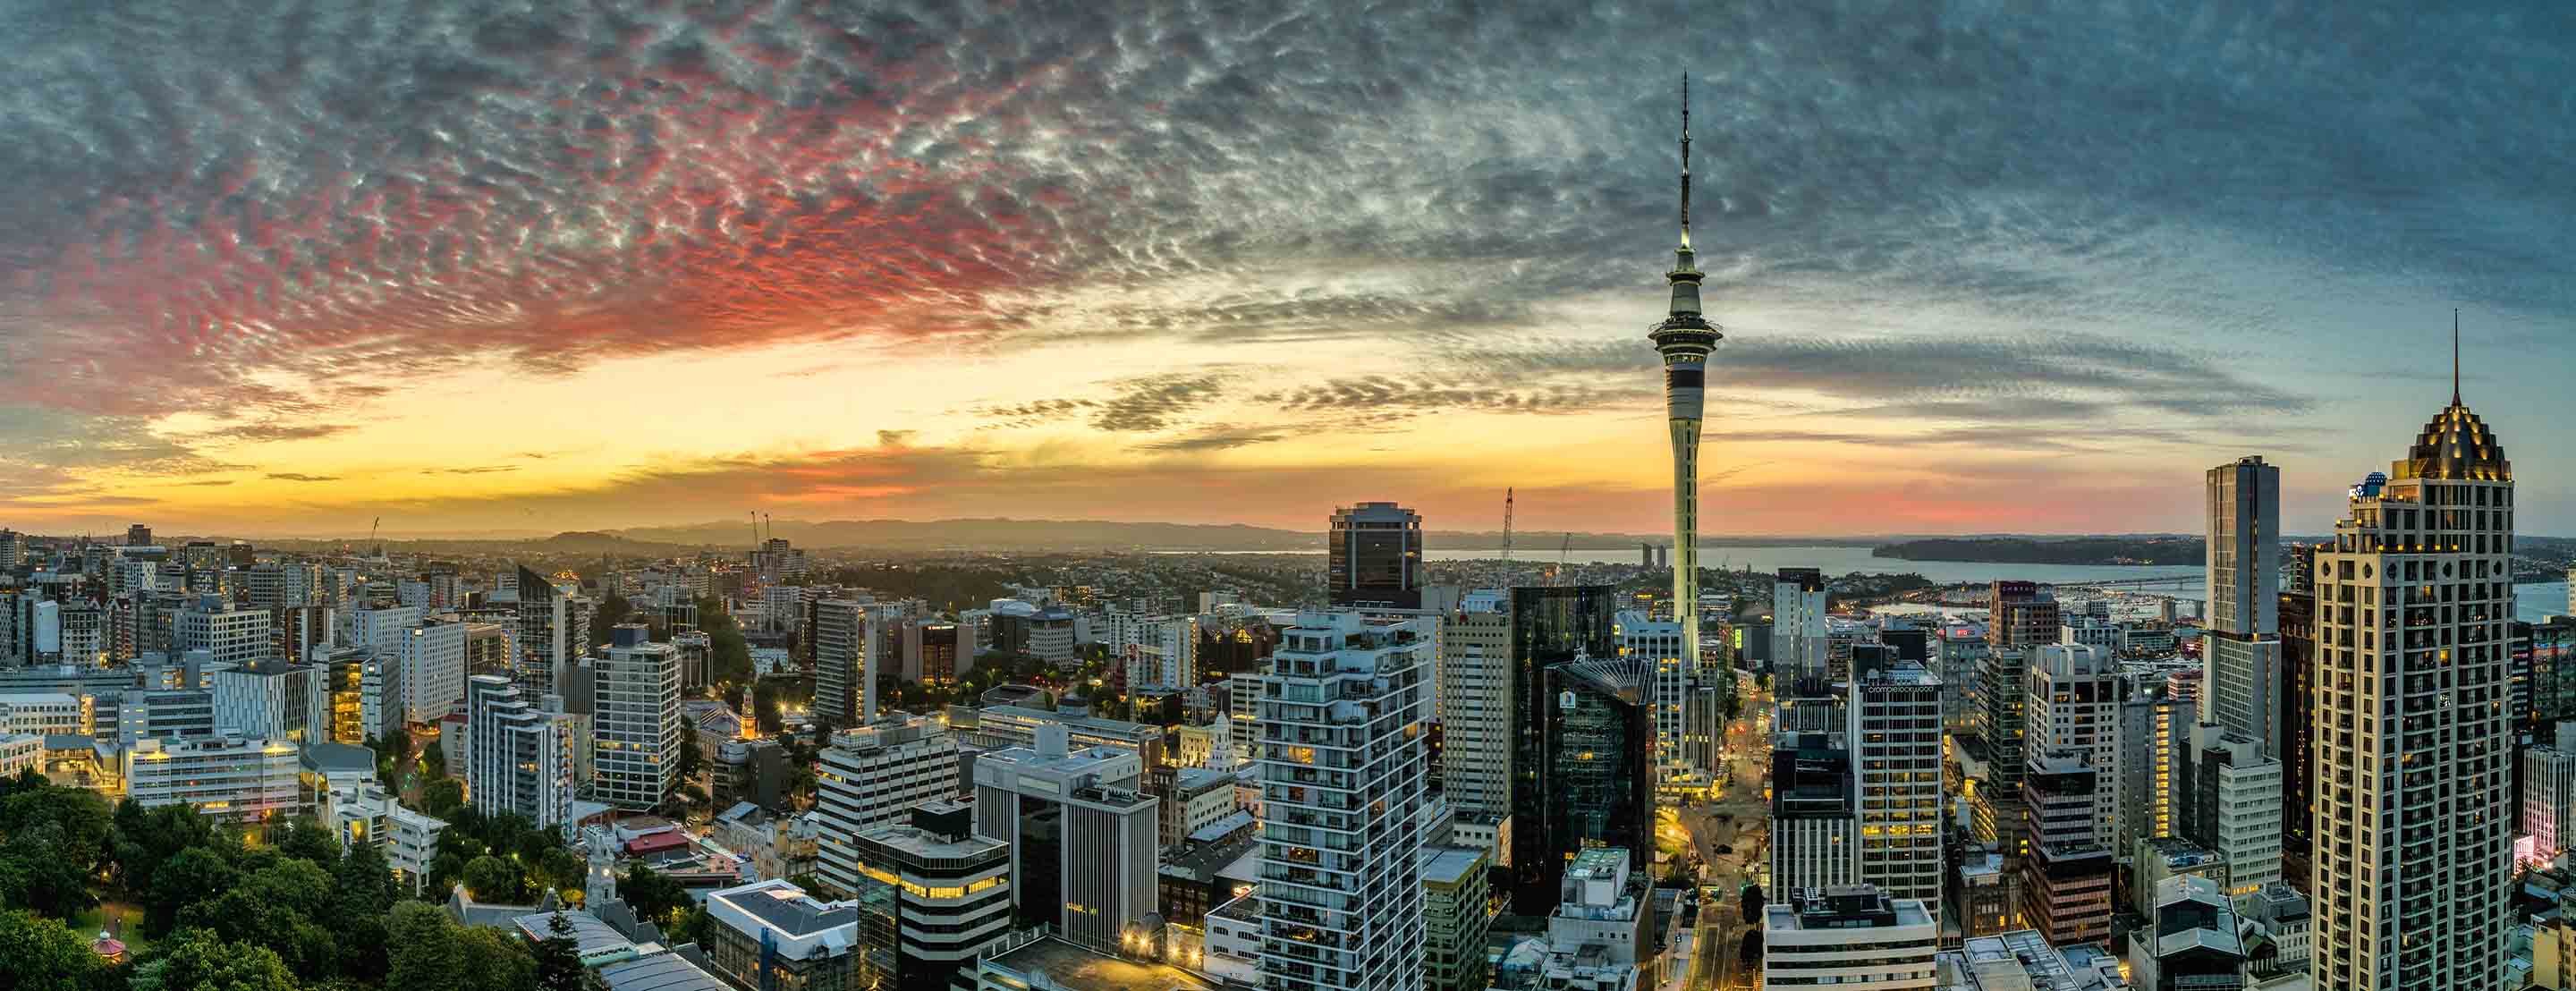 Auckland is in the North Island of New Zealand